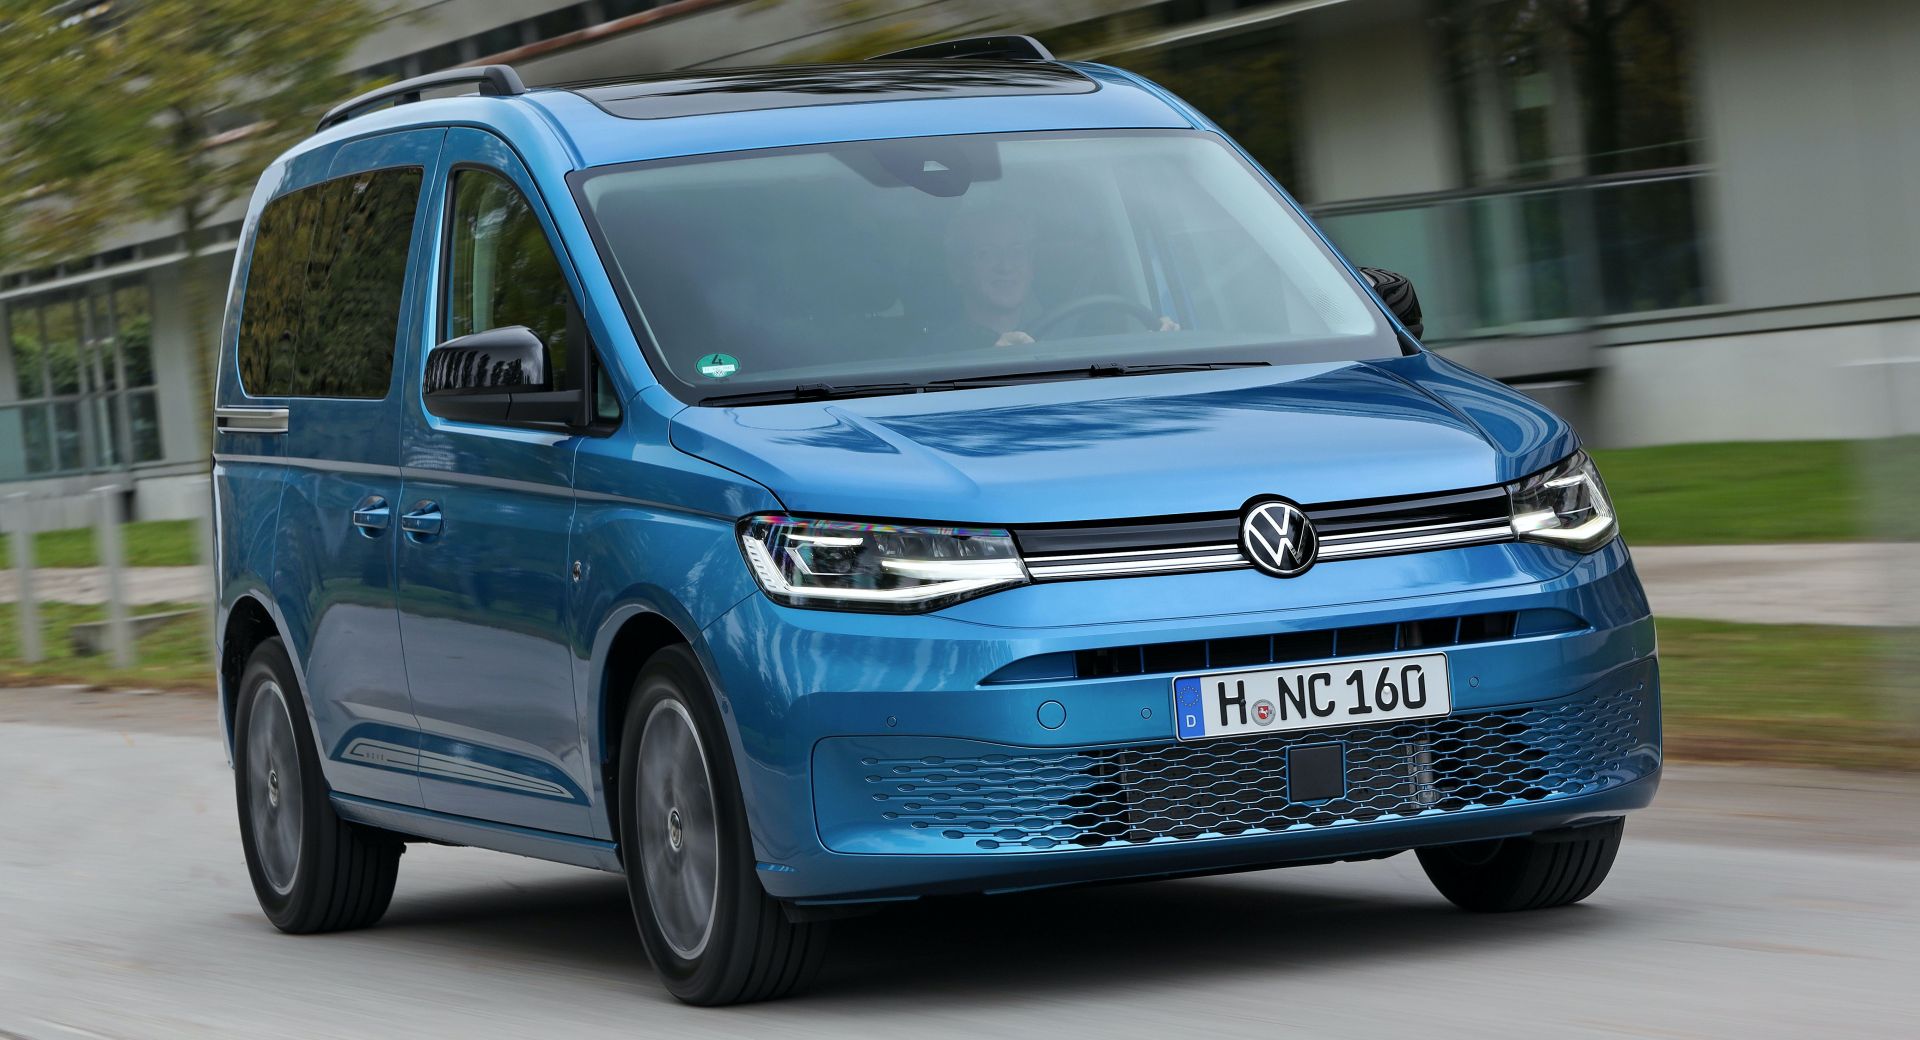 https://www.carscoops.com/wp-content/uploads/2020/10/2021-VW-Caddy-family-0.jpg